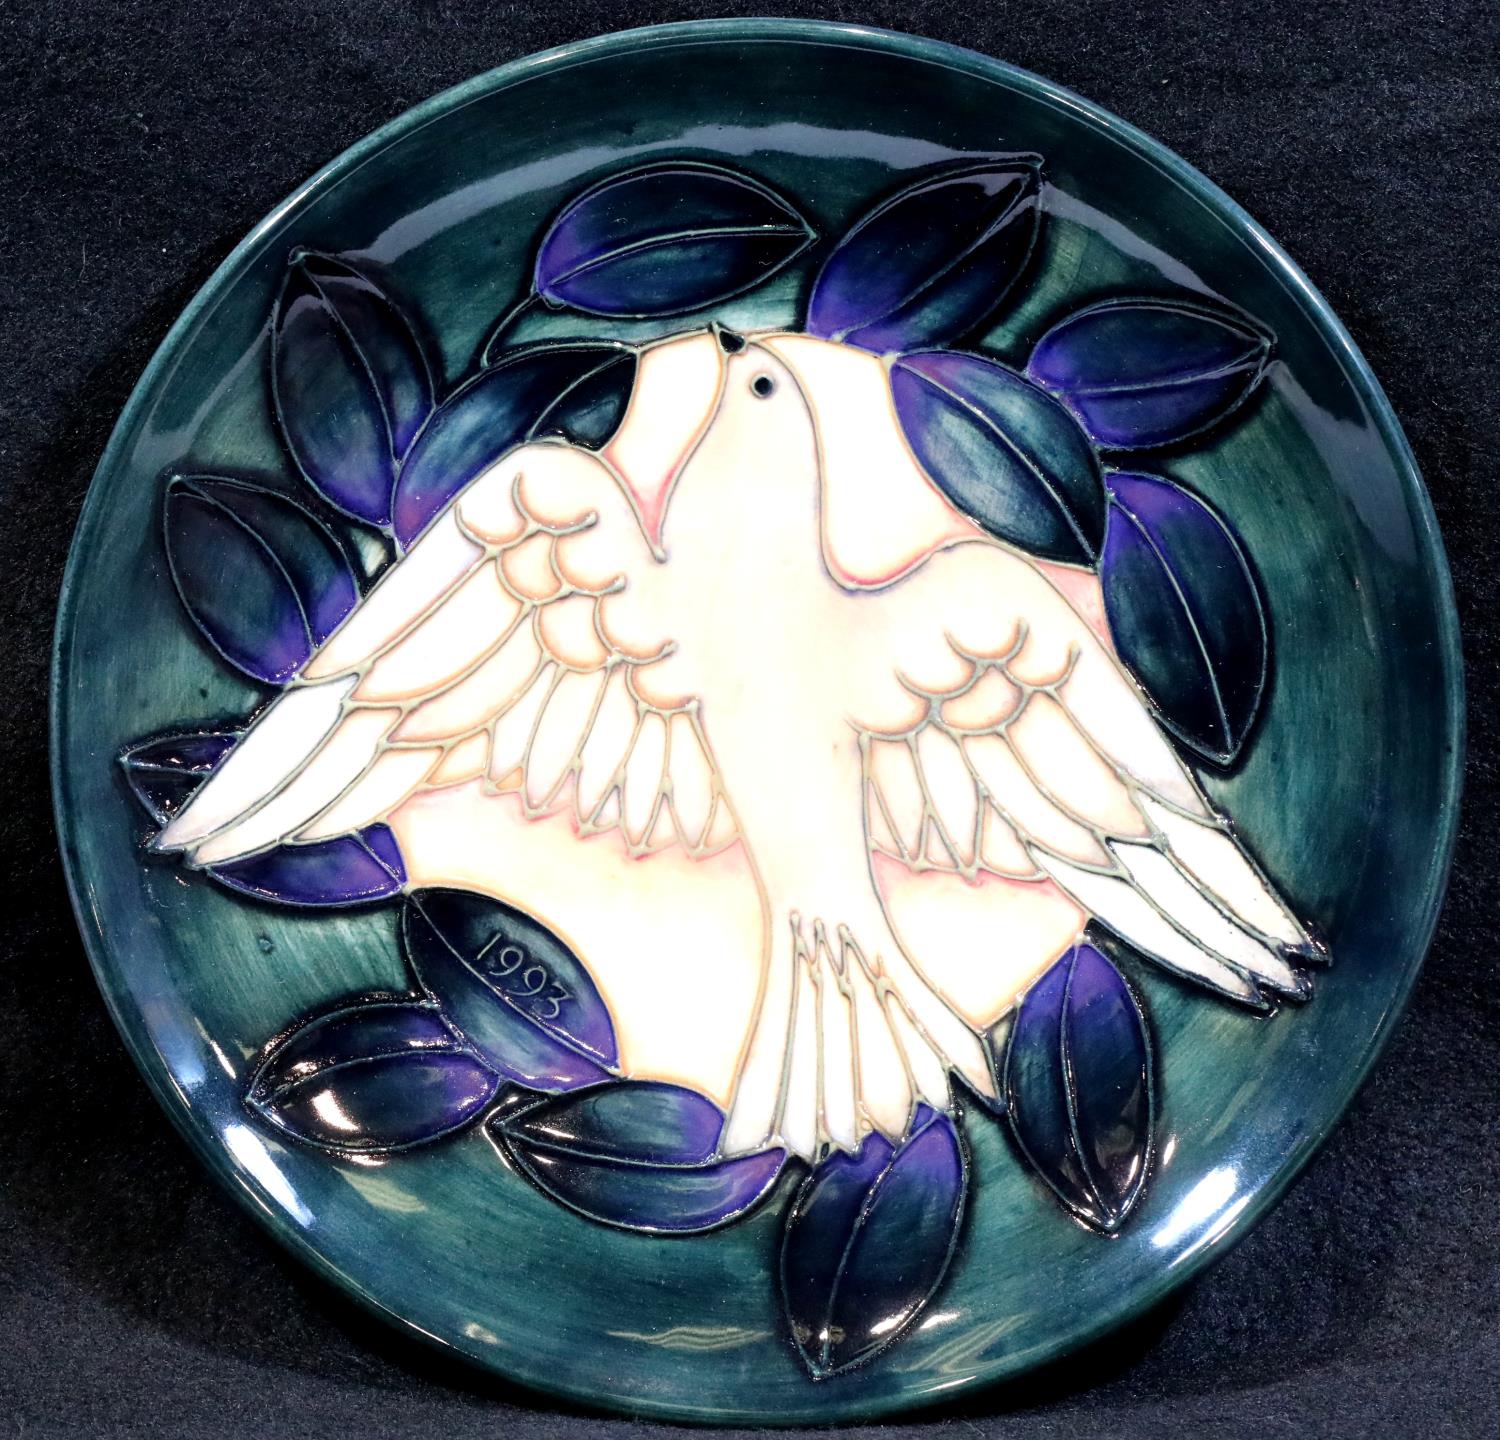 Boxed Moorcroft limited edition 1993 Doves year plate 303/500. P&P group 2 (£18+ VAT for the first